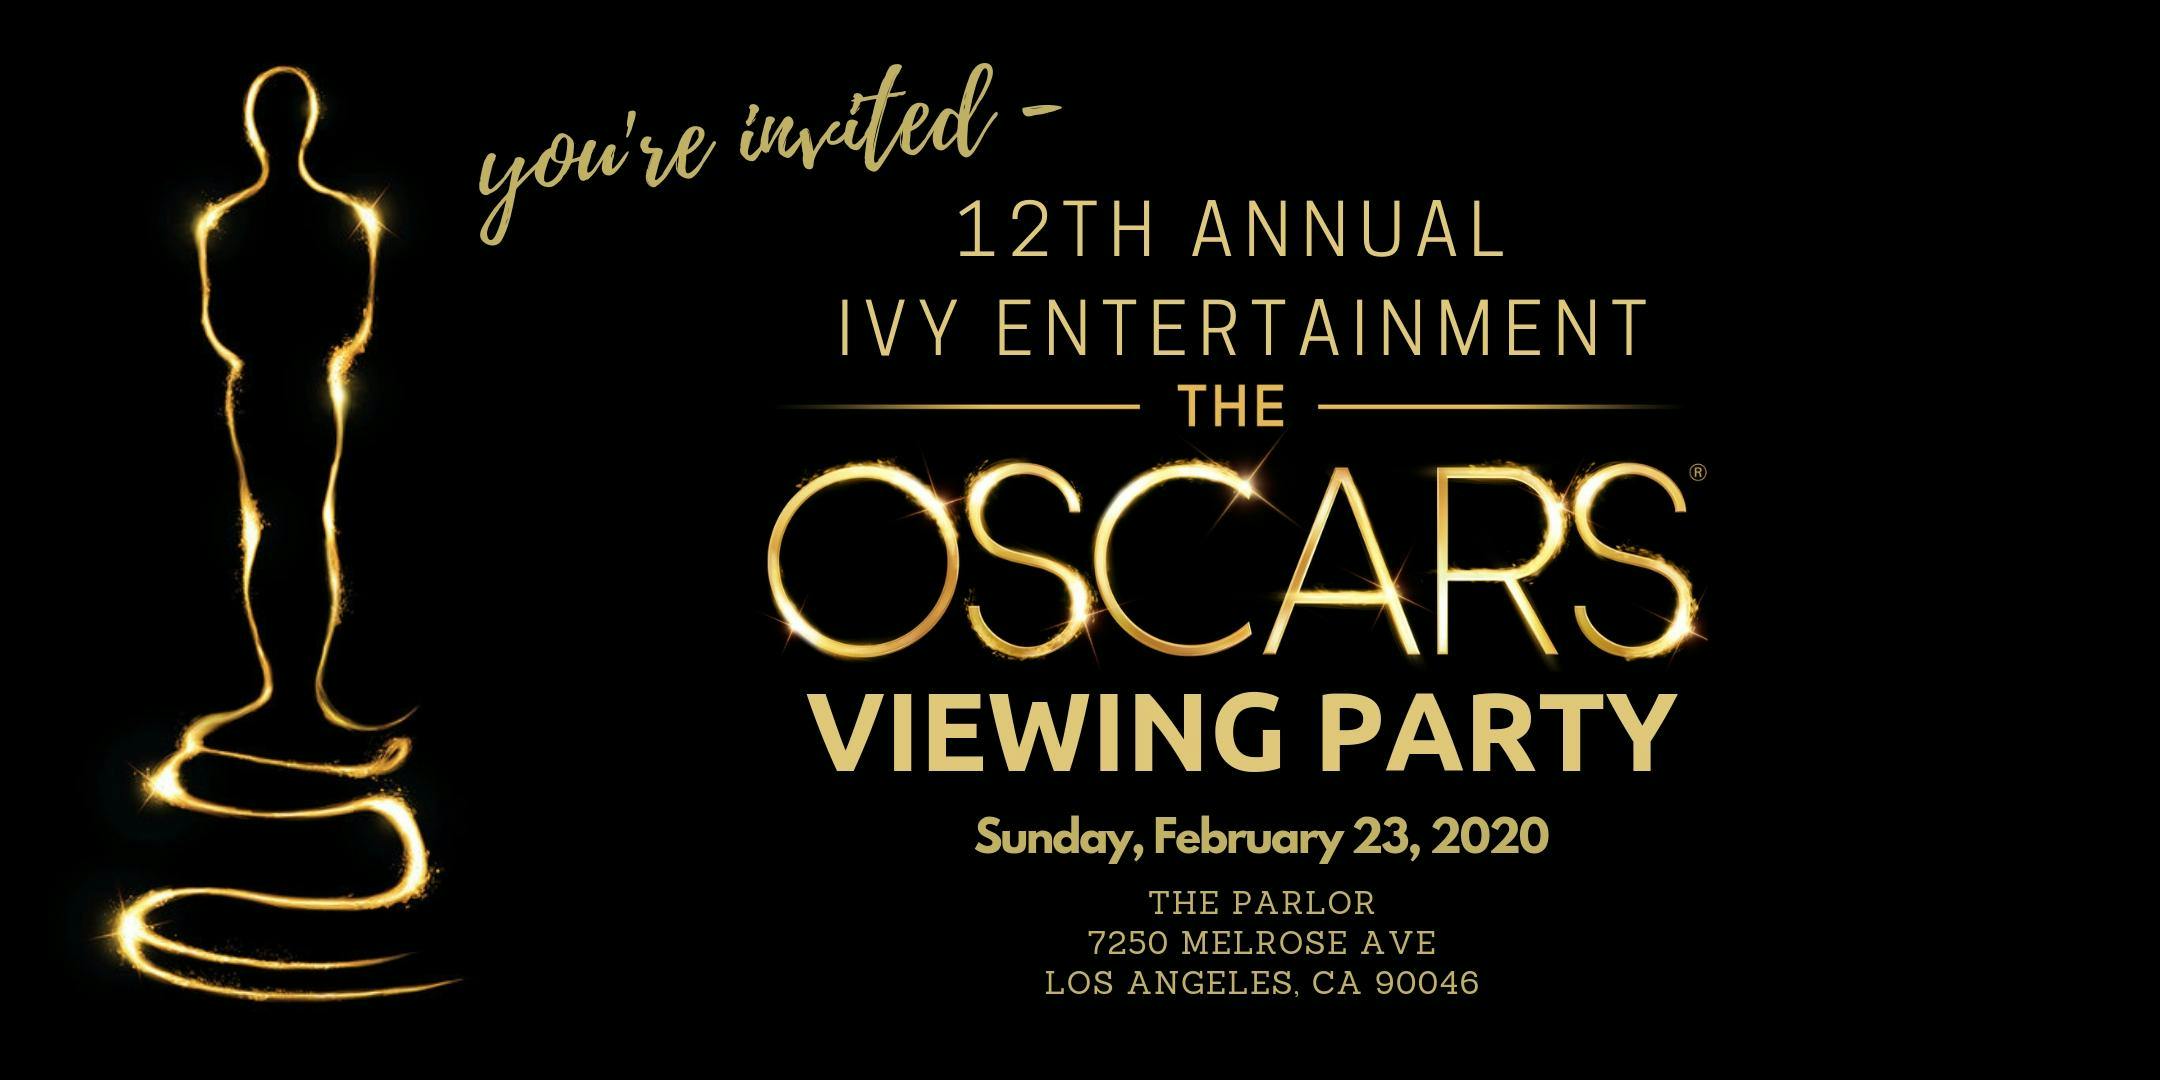 IVY Entertainment Oscars Viewing Party